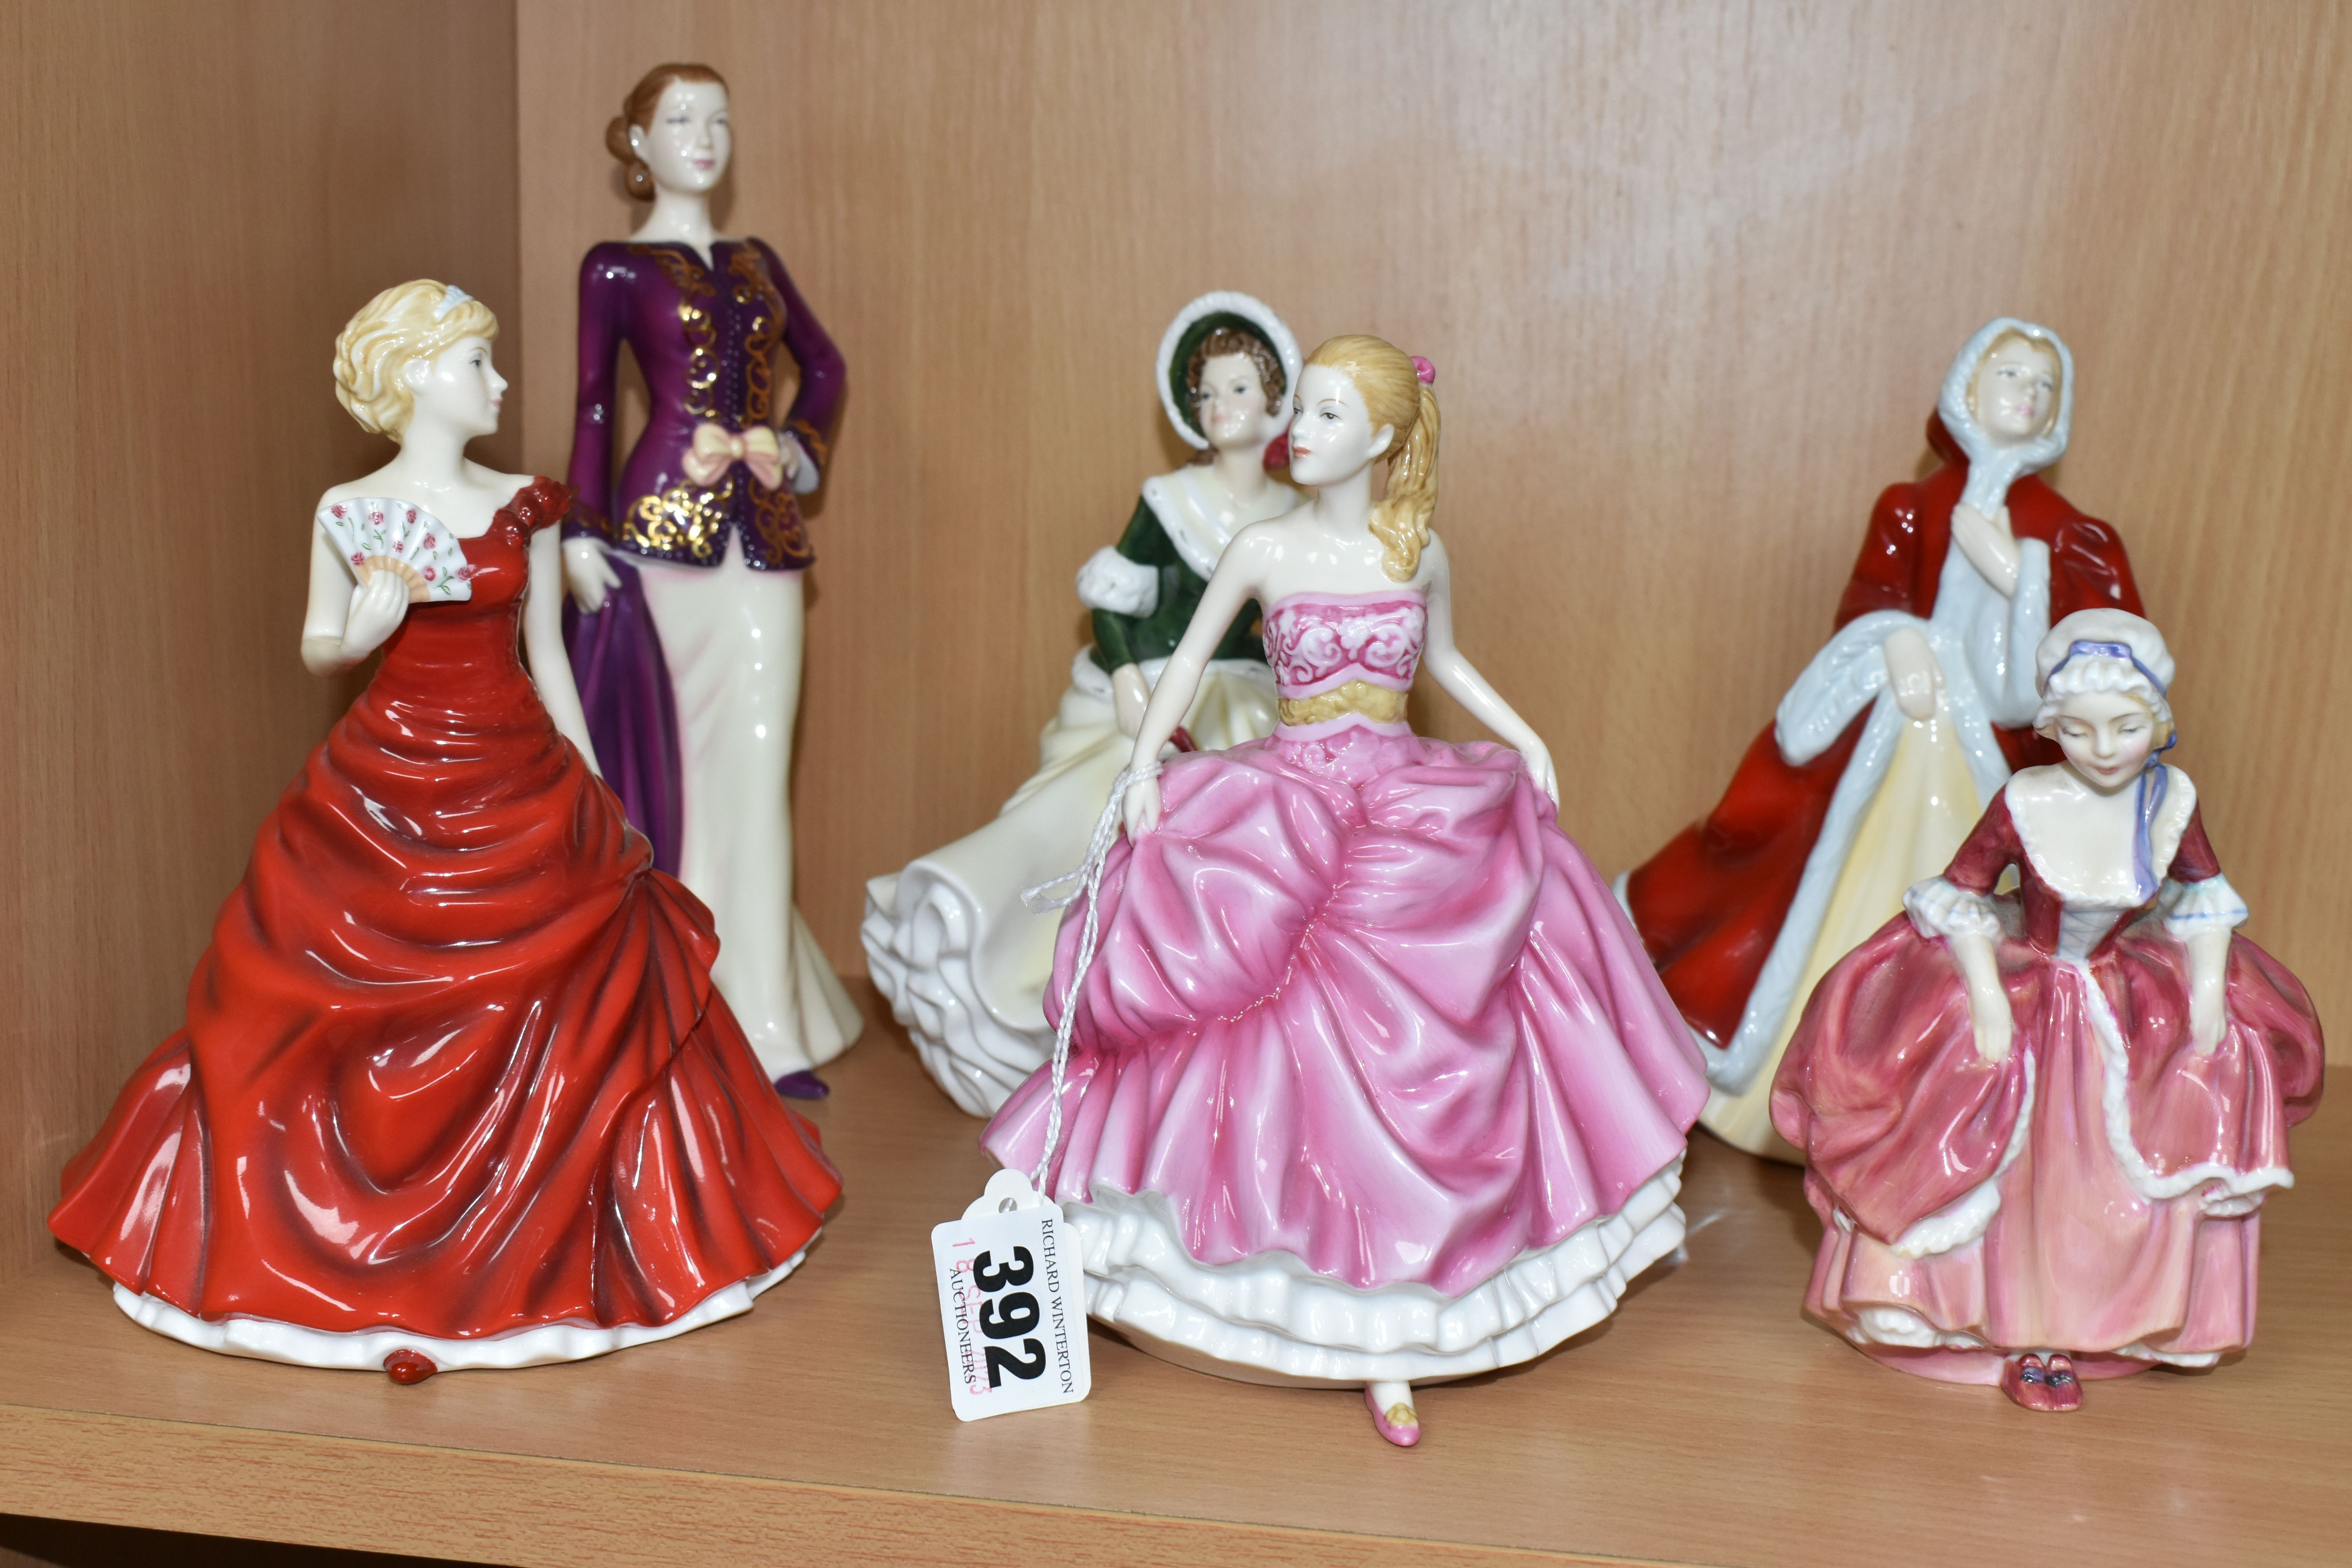 SIX ROYAL DOULTON FIGURINES, comprising Pretty Ladies: Amelia HN5440, Madeline HN5513, Christmas Day